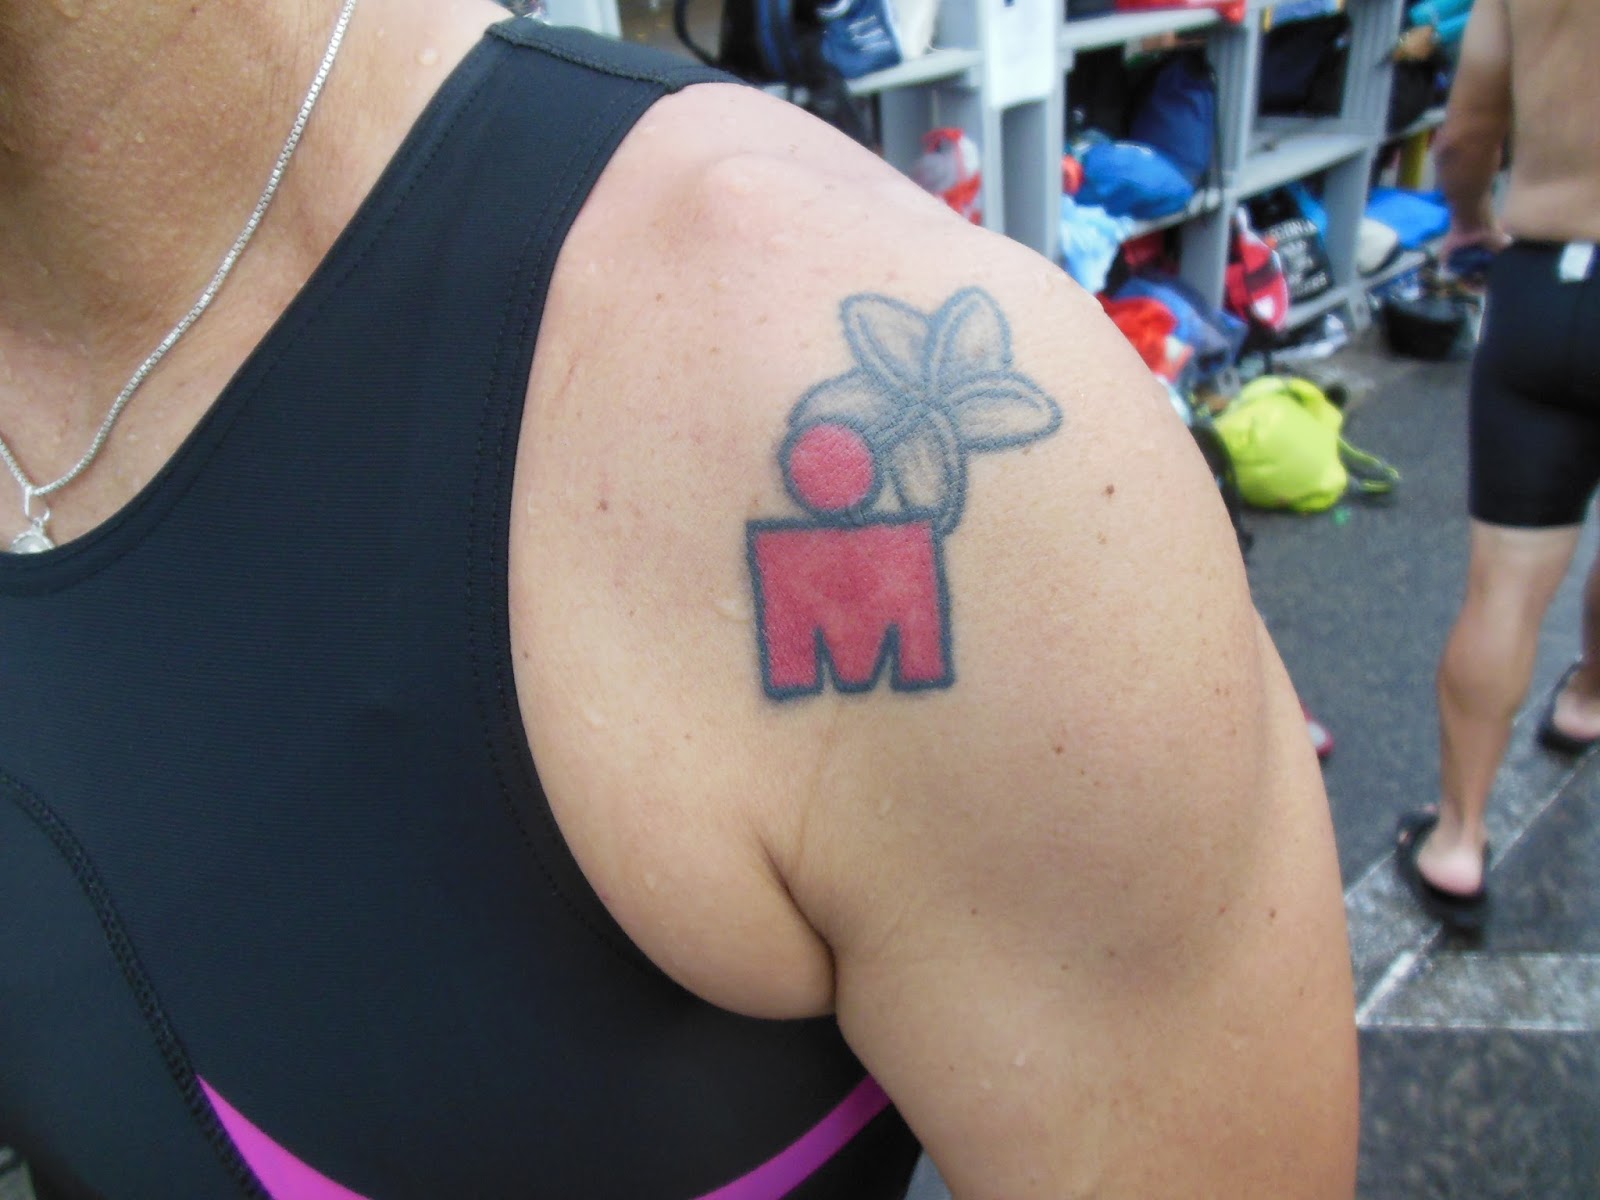 Thinking About an Ironman Tattoo? This May Help